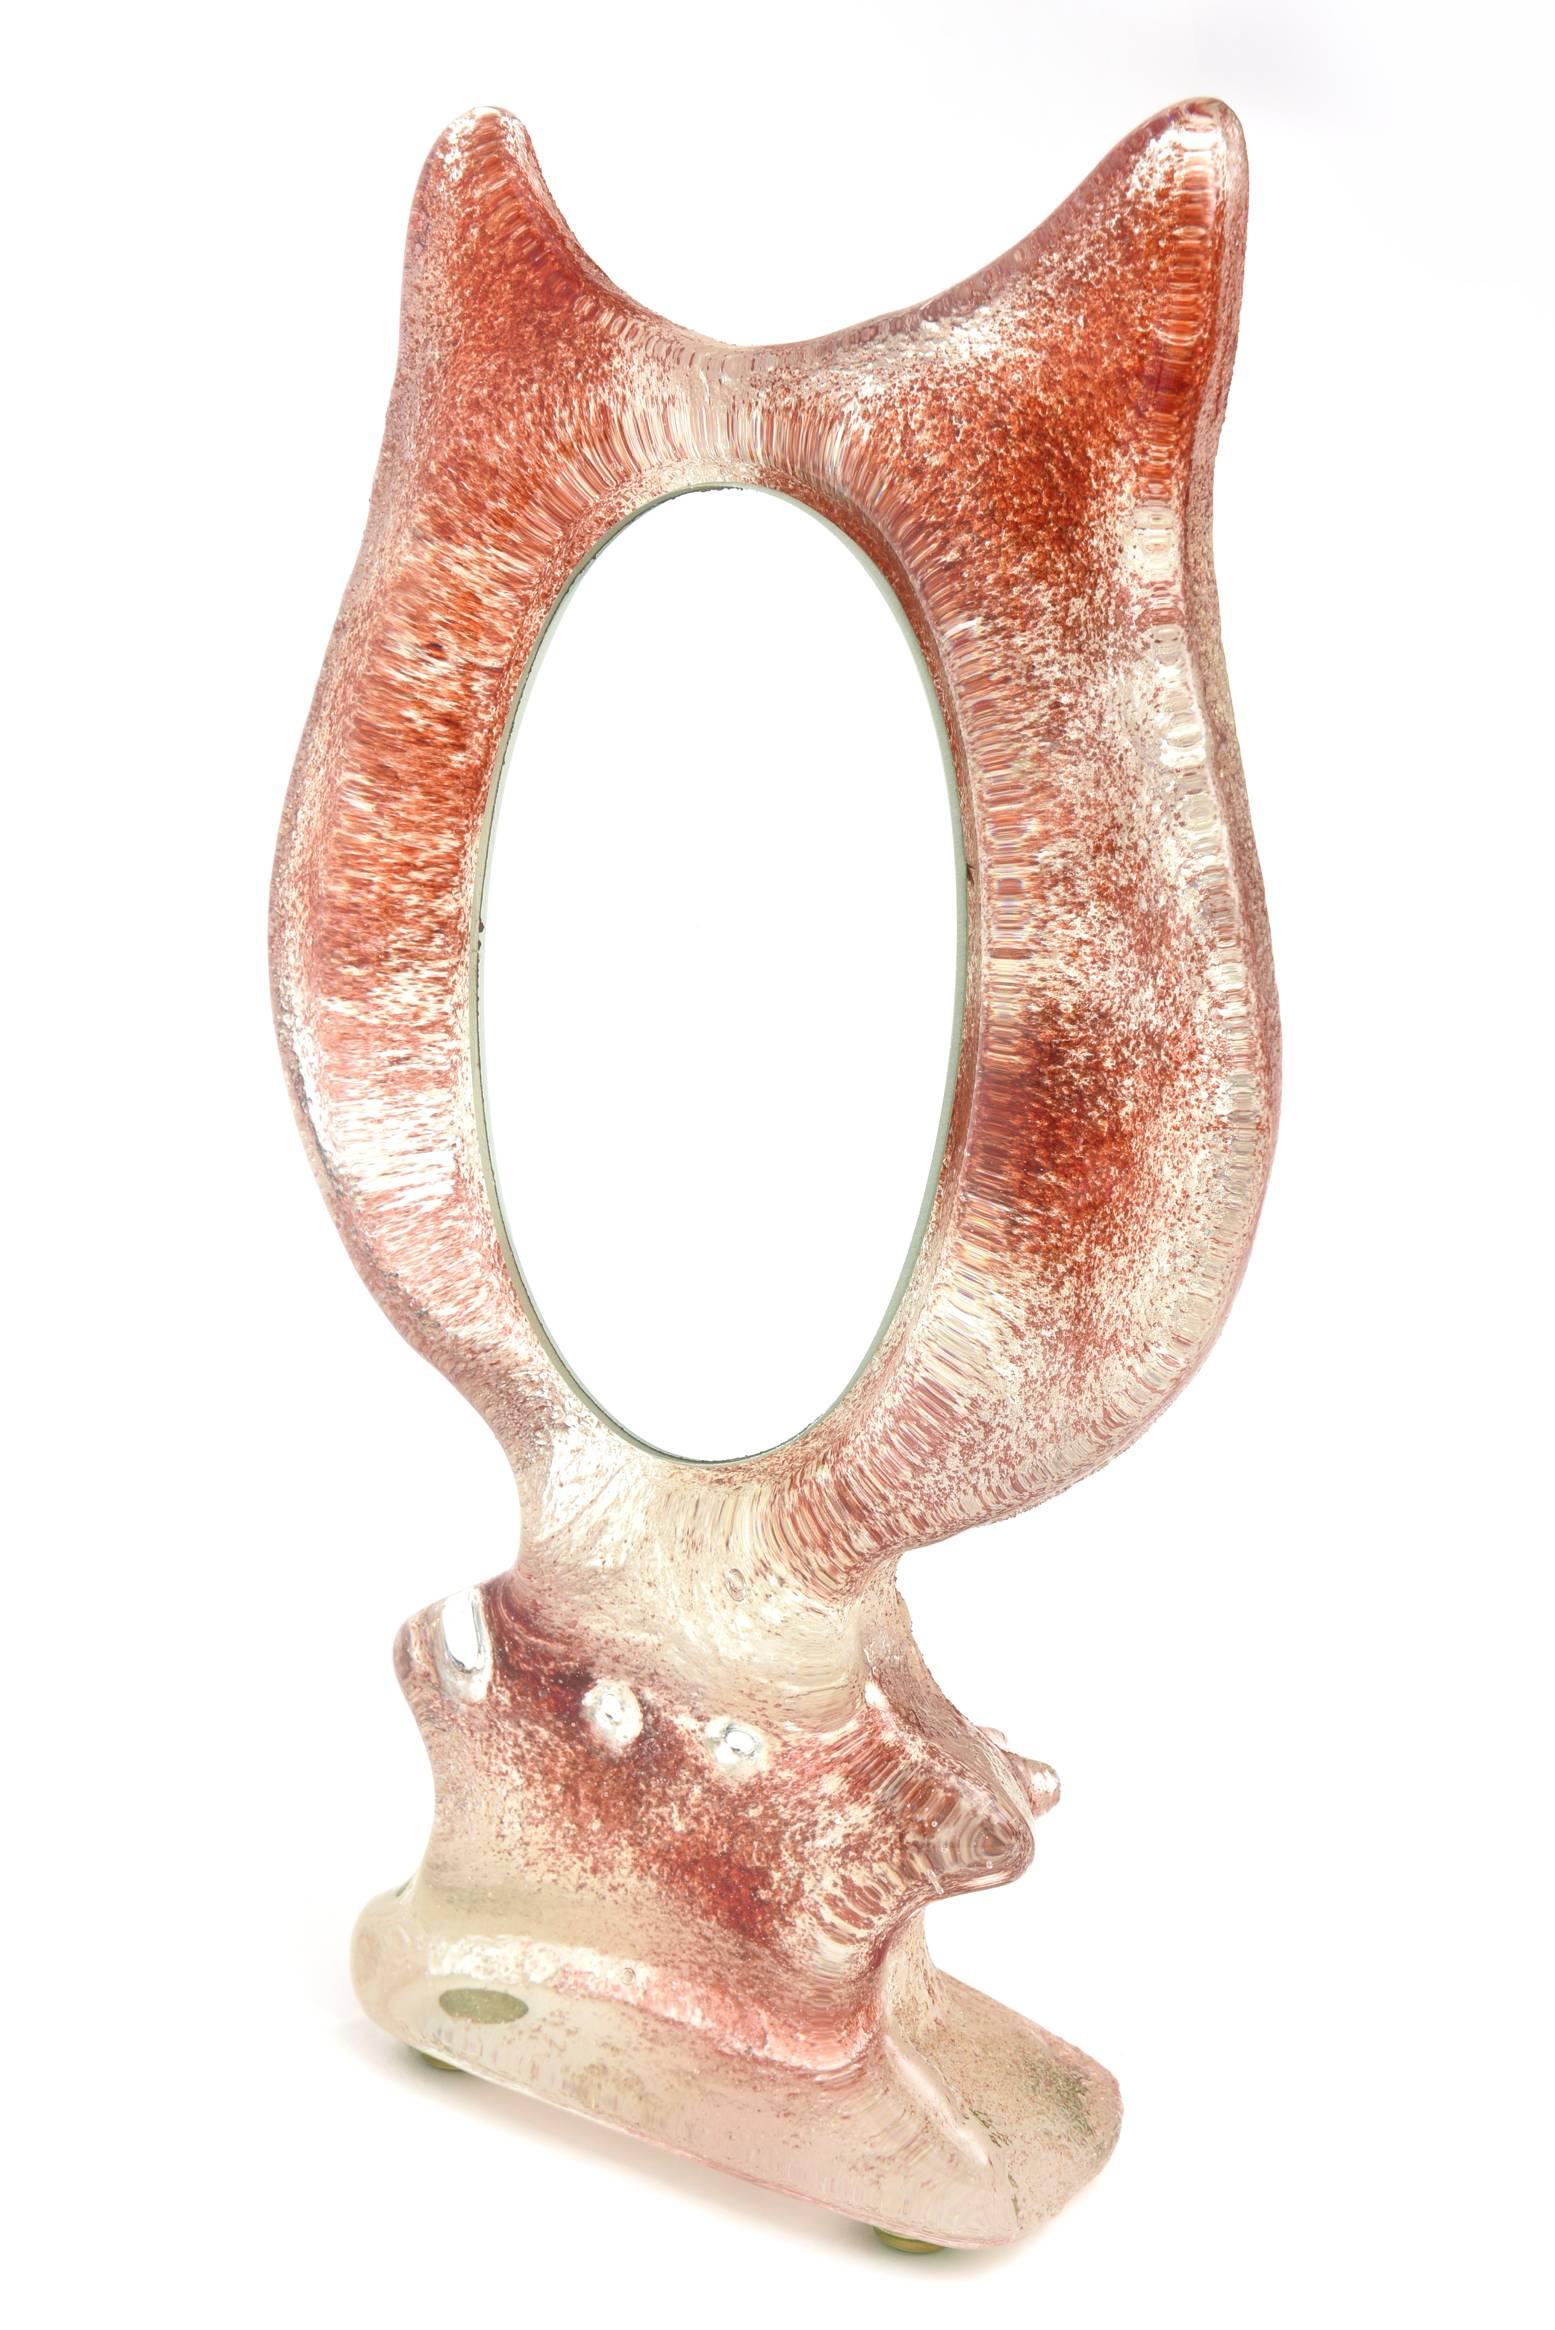 This charming small glass Kosta Boda attributed tabletop mirror in the shape of a cat's ears has the French glass technique of the look of patte de verre but is sandblasted glass. The colors are in hues of orange/rust red and clear glass. It is